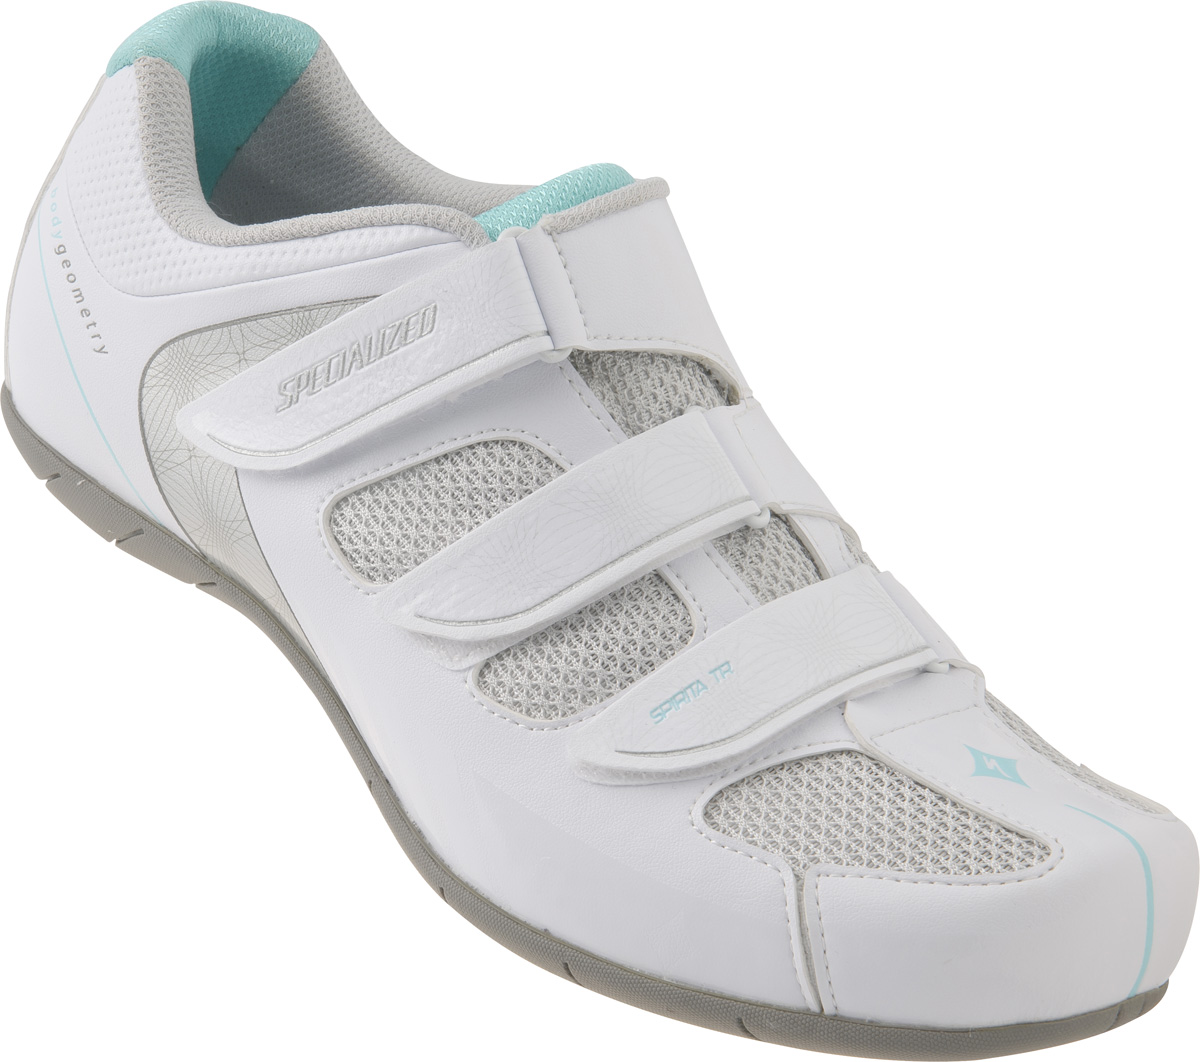 rbx shoes for women